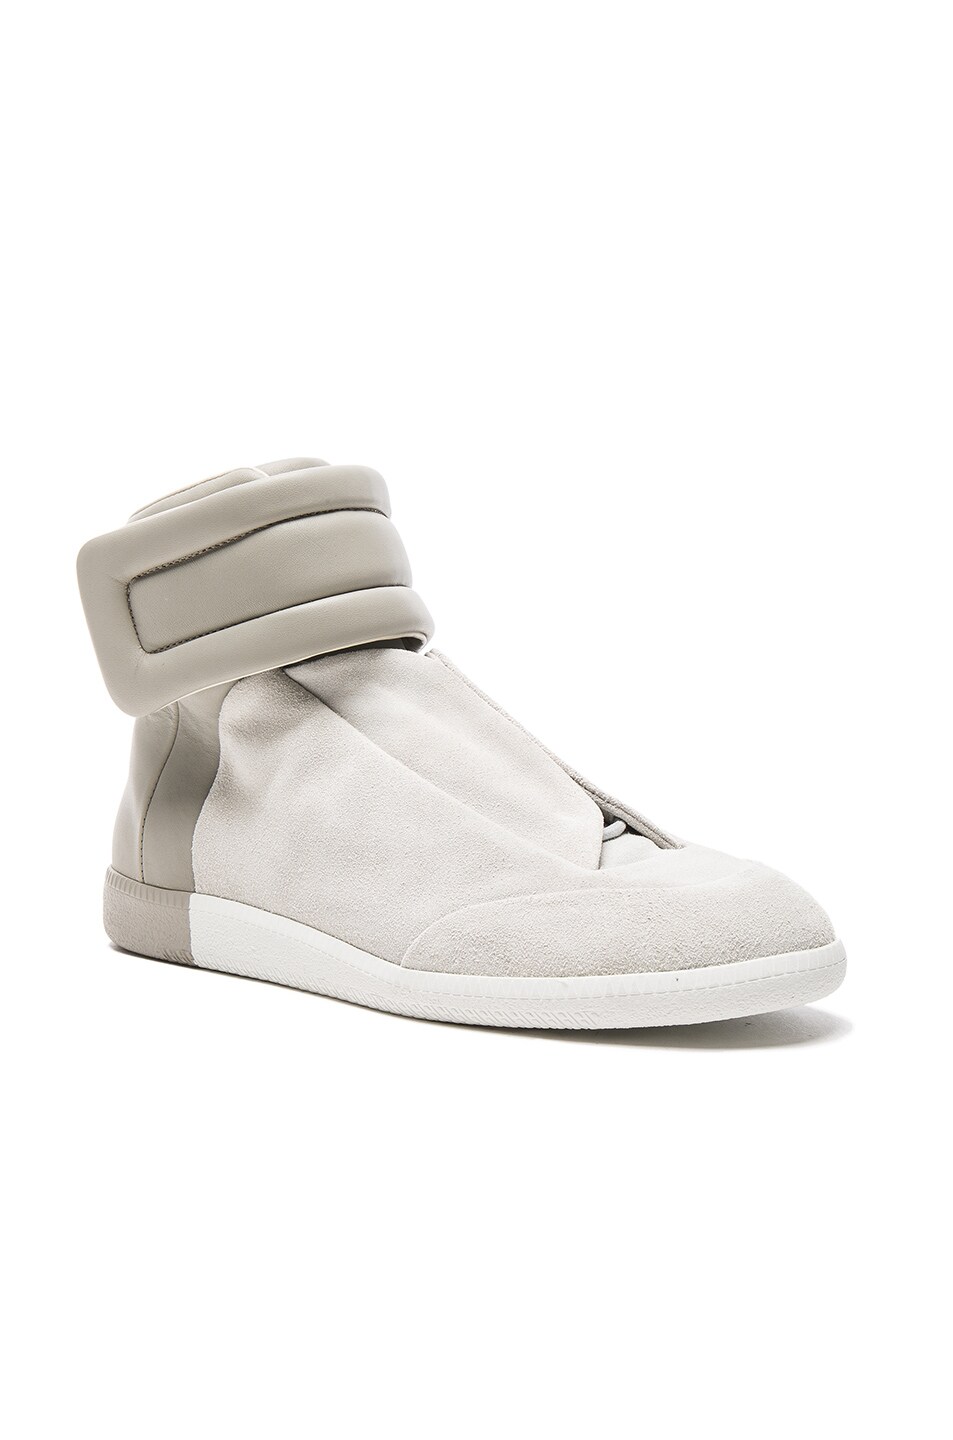 Image 1 of Maison Margiela Calfskin & Suede Future High Tops in Plaster & White